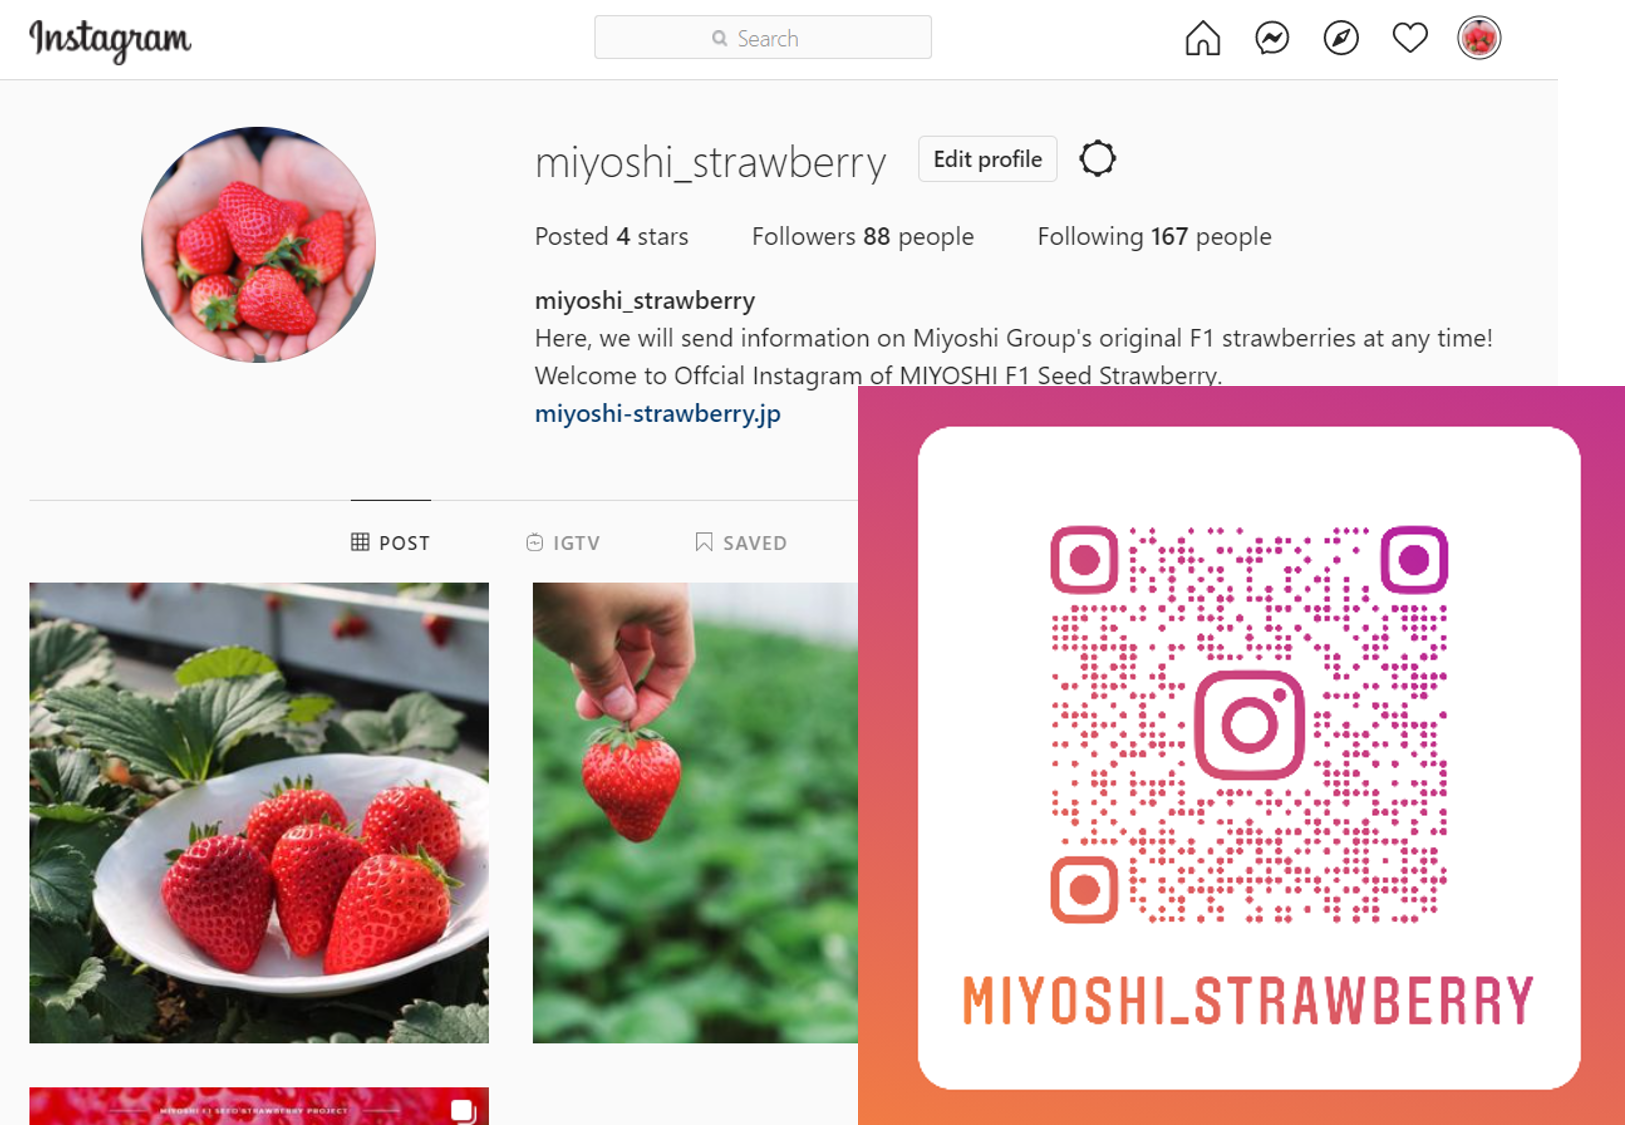 The official Instagram starts showing MIYOSHI strawberry world.